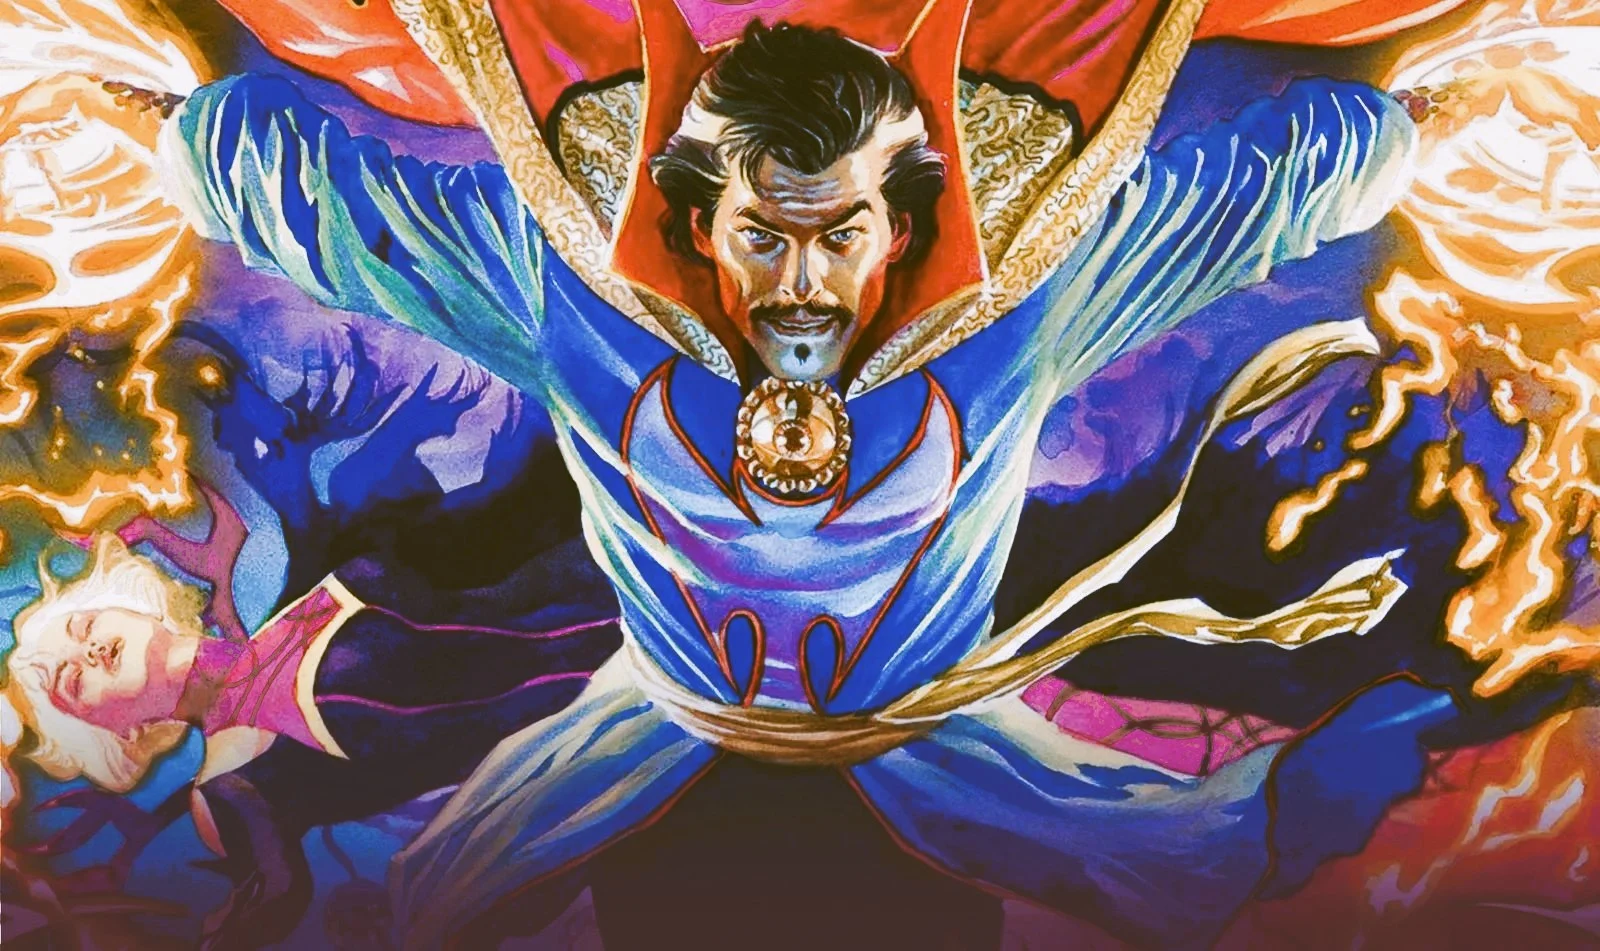 Are Doctor Strange’s mystic senses consistent and often used?